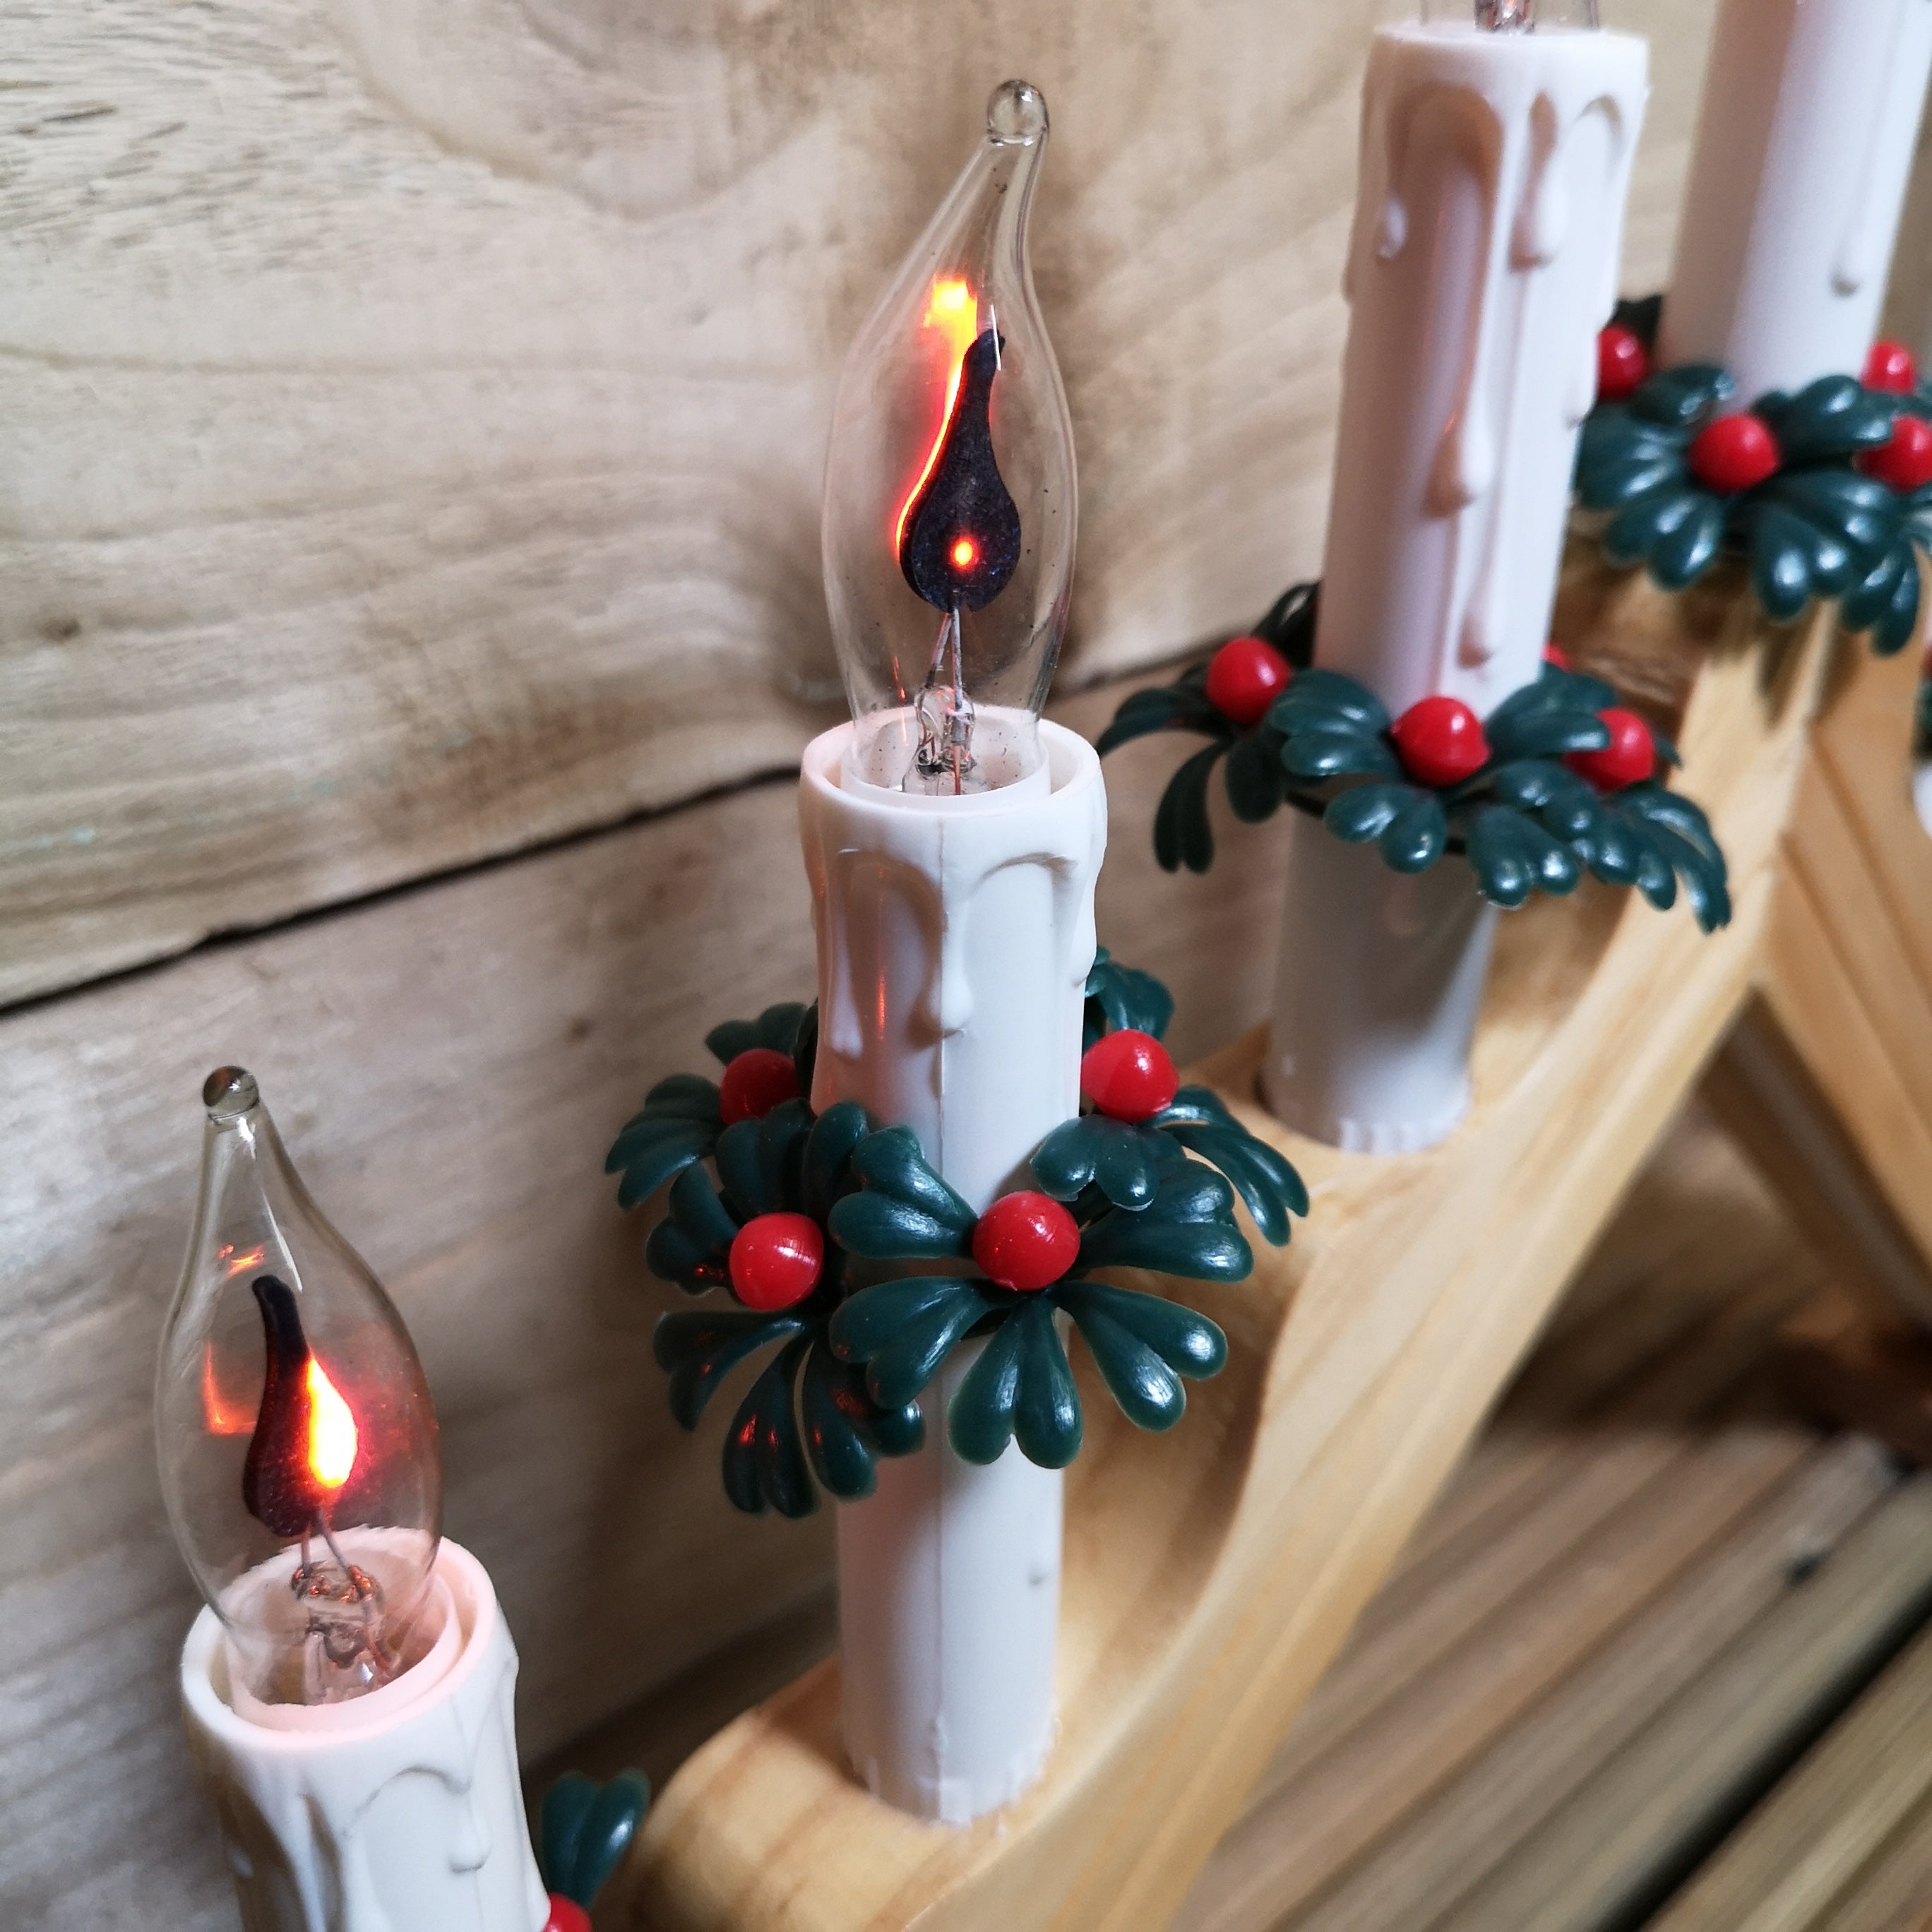 40cm Premier Christmas Candlebridge with 7 Flickering Bulb in Light Wood Finish Mains Operated